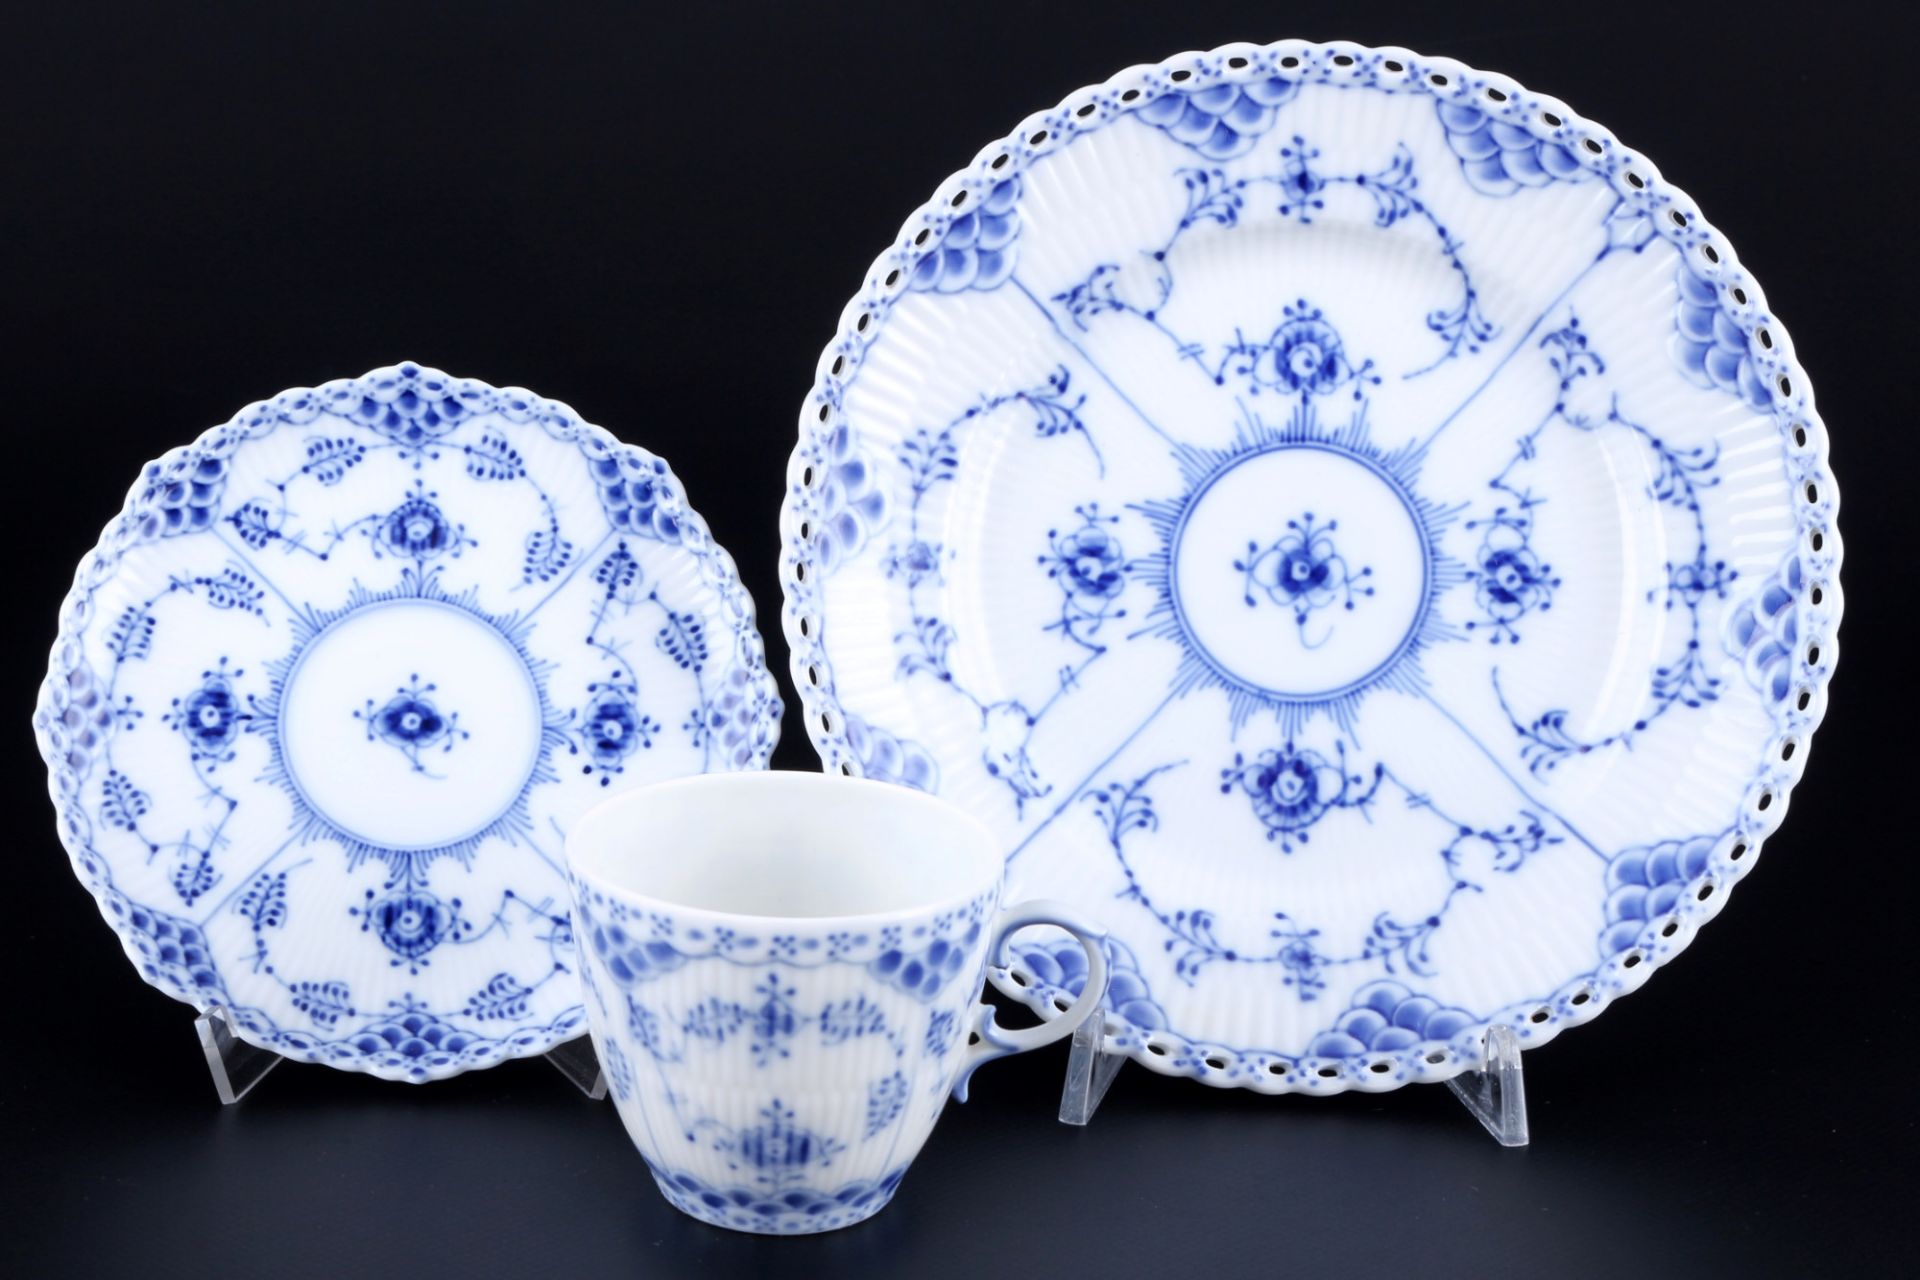 Royal Copenhagen Musselmalet Full Lace 6 coffee cups with dessert plates 1035/1086 1st choice, Voll - Image 2 of 3